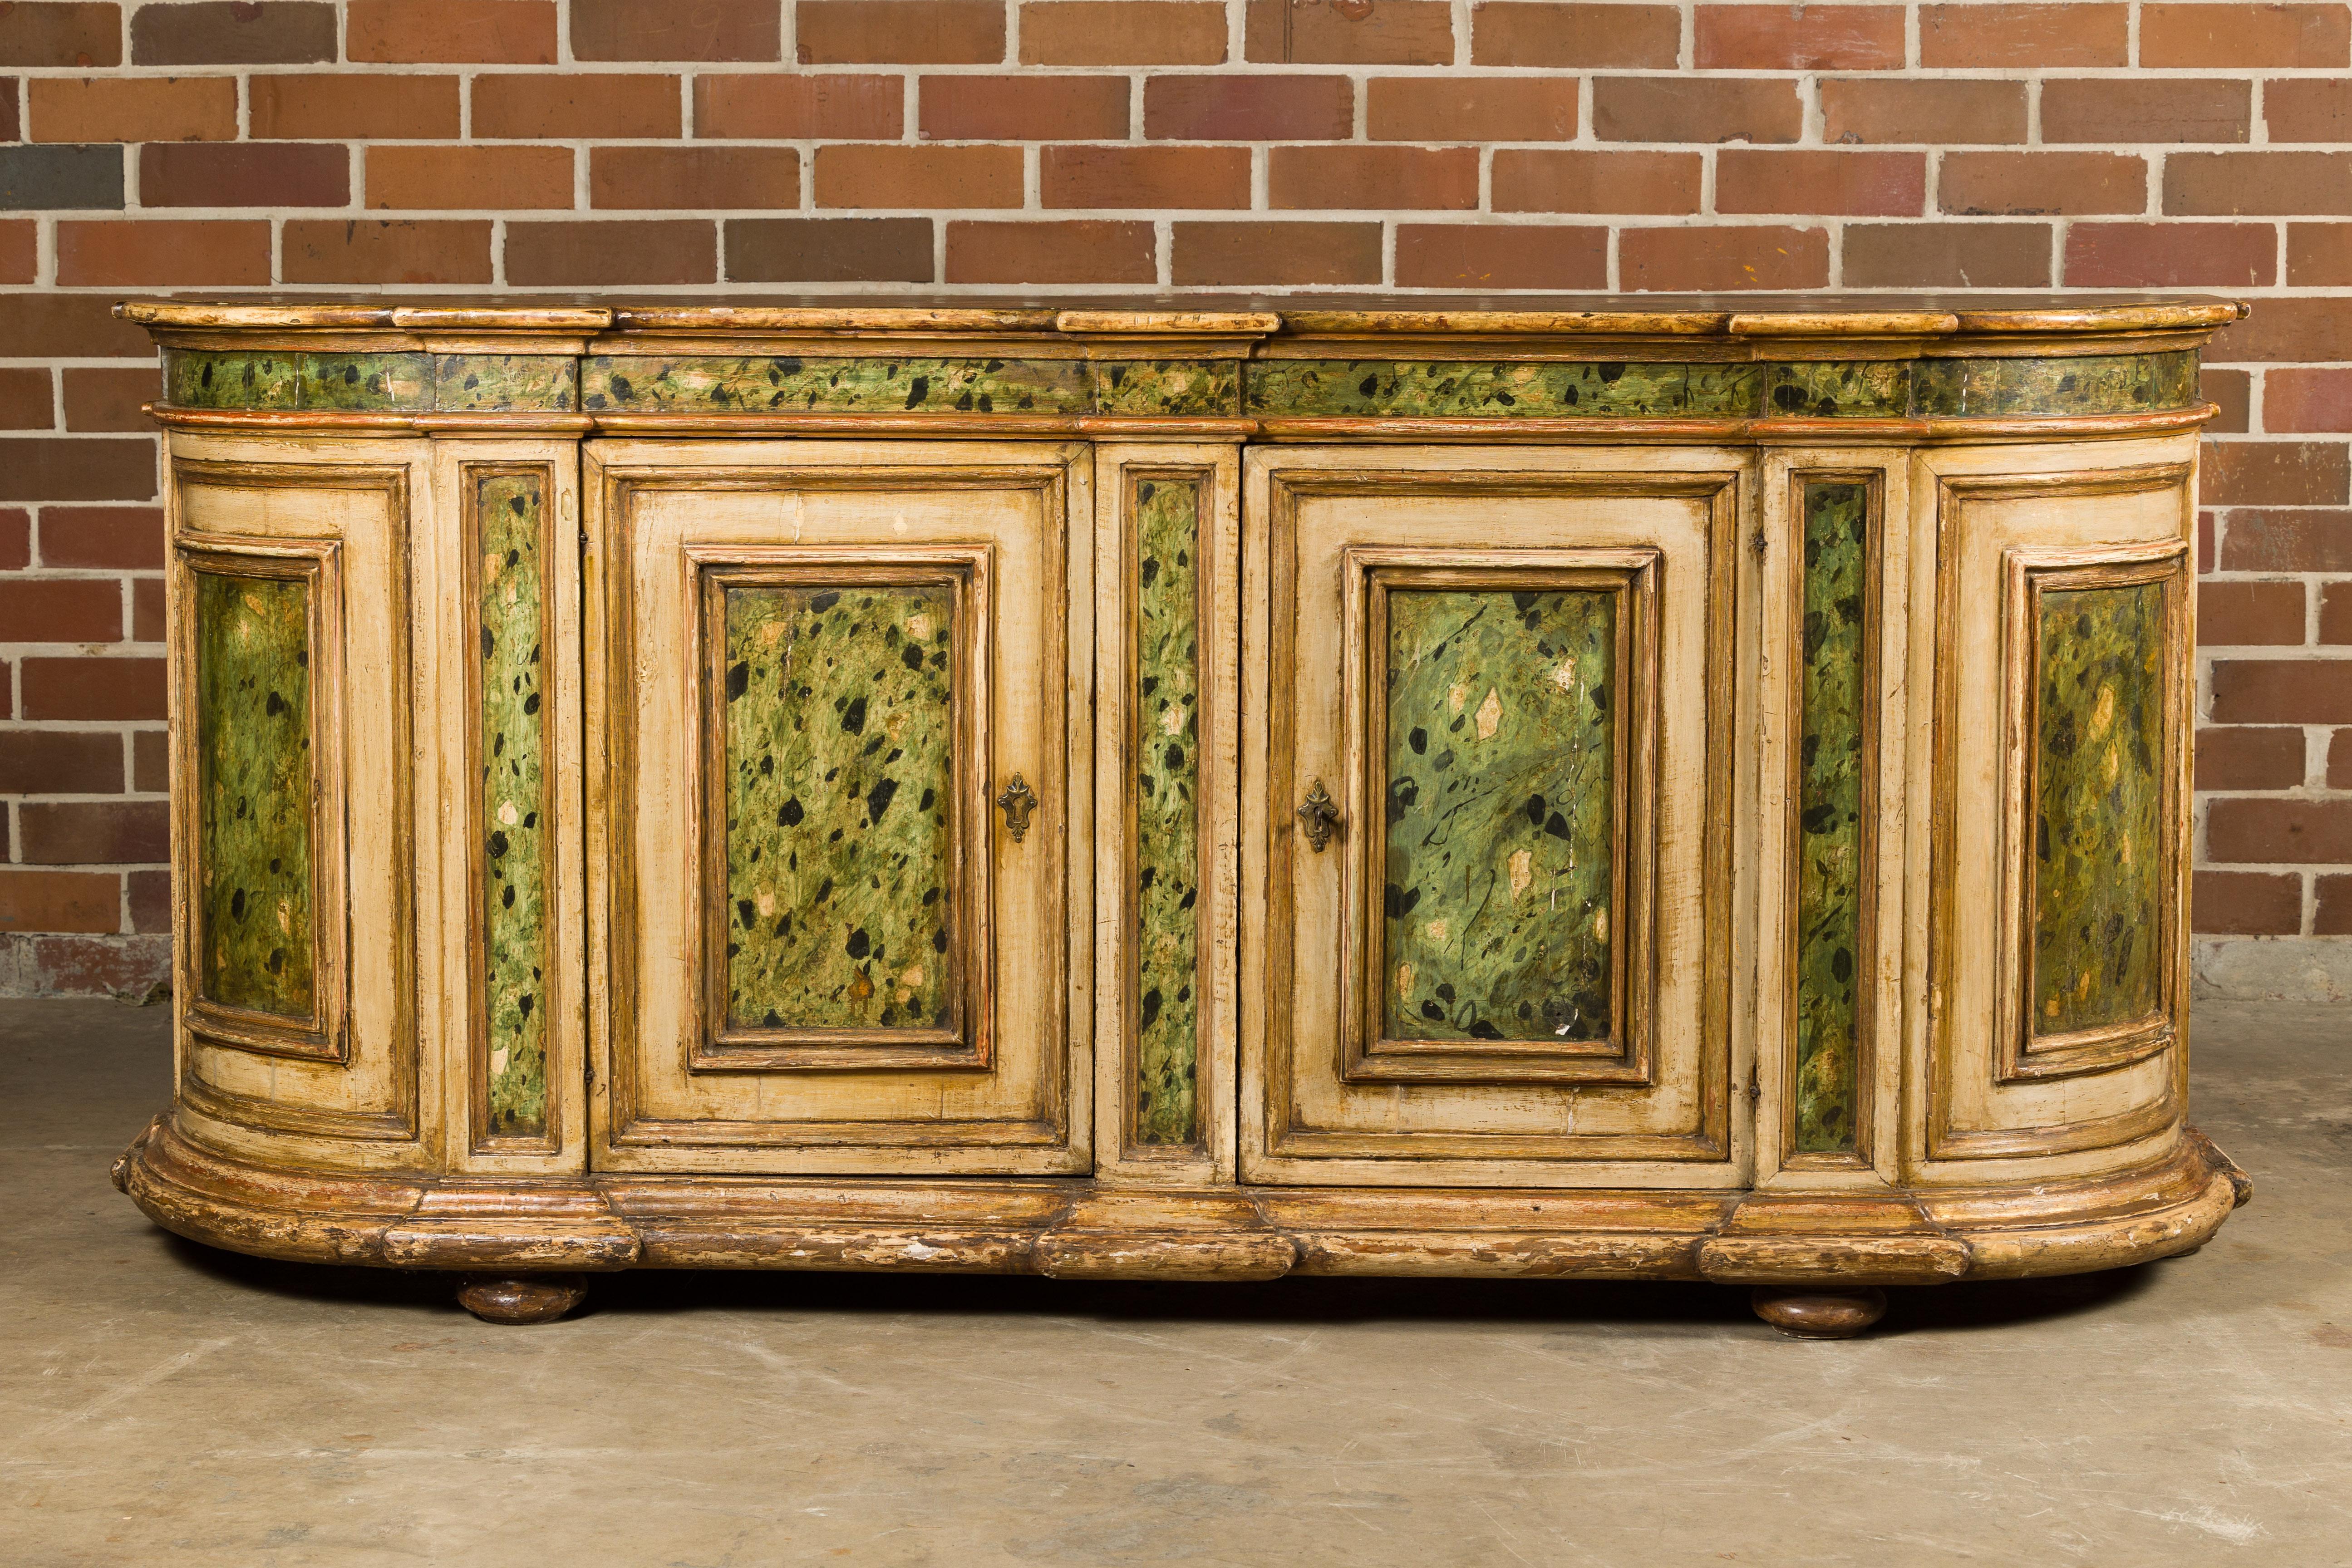 An Italian painted wood sideboard from the 18th century with two doors and rounded sides. This 18th-century Italian painted wood sideboard is a captivating piece that encapsulates the elegance of its era. Its classic design features two gracefully